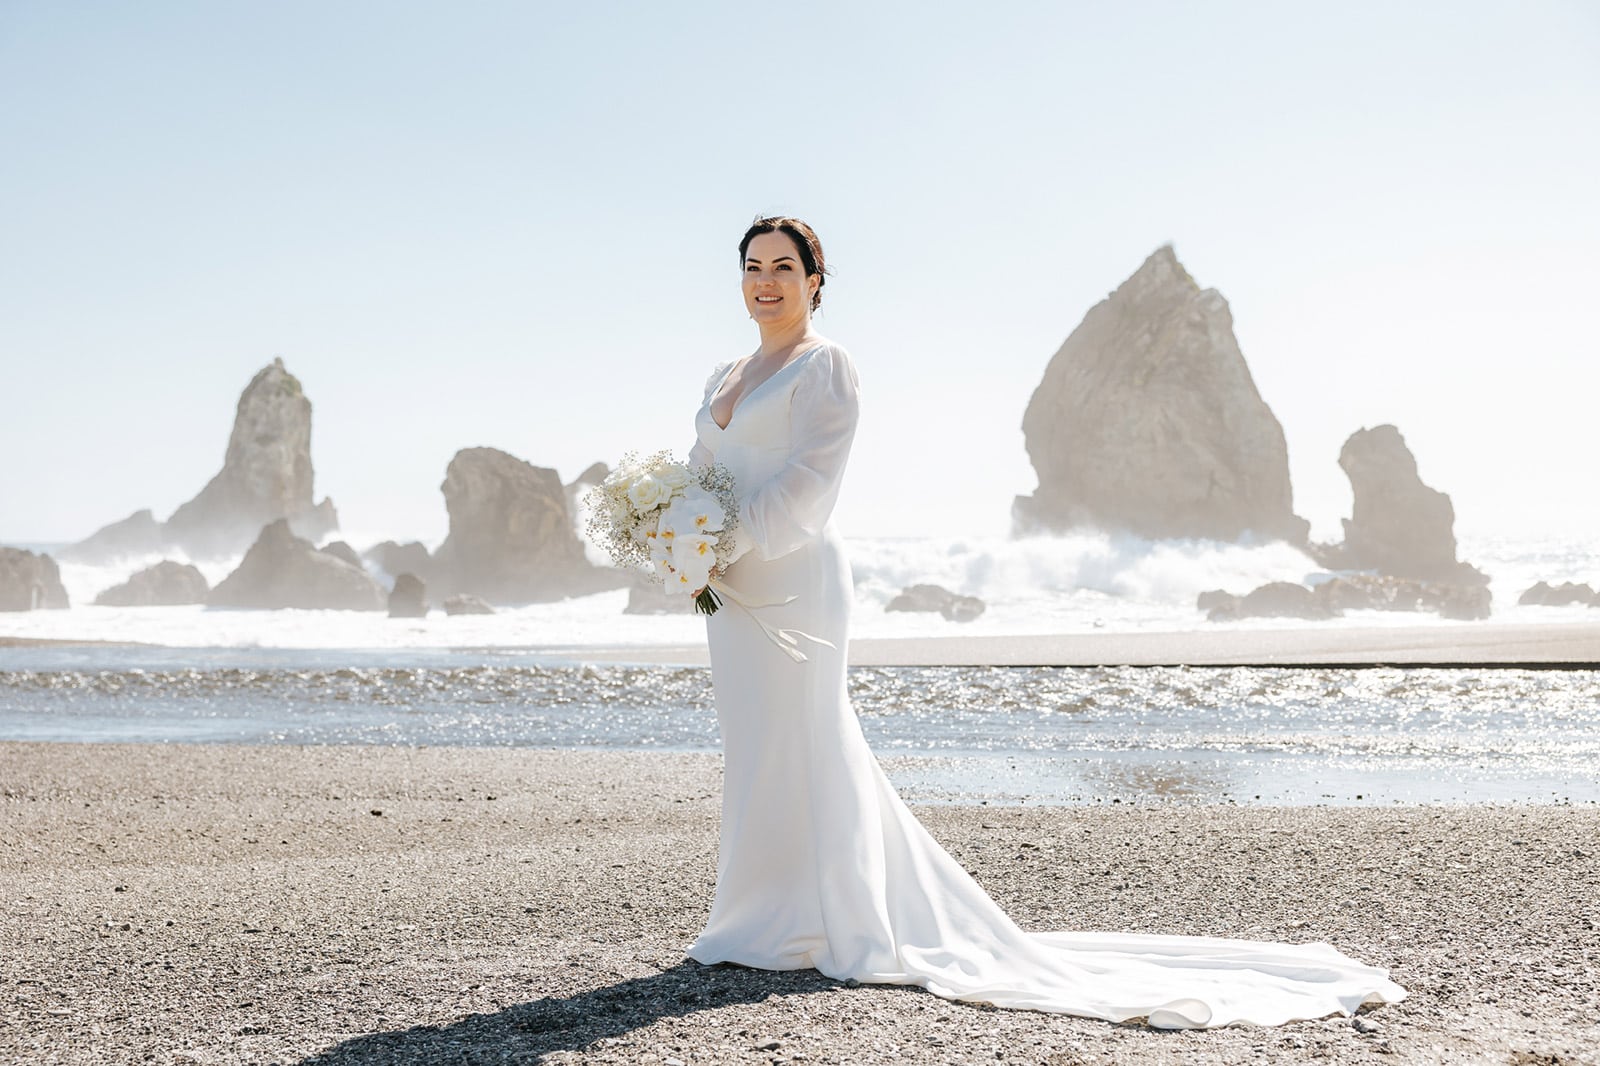 Milford Sounds Heli Wedding, Luxury elopement in New Zealand, Wedding photos at the beach